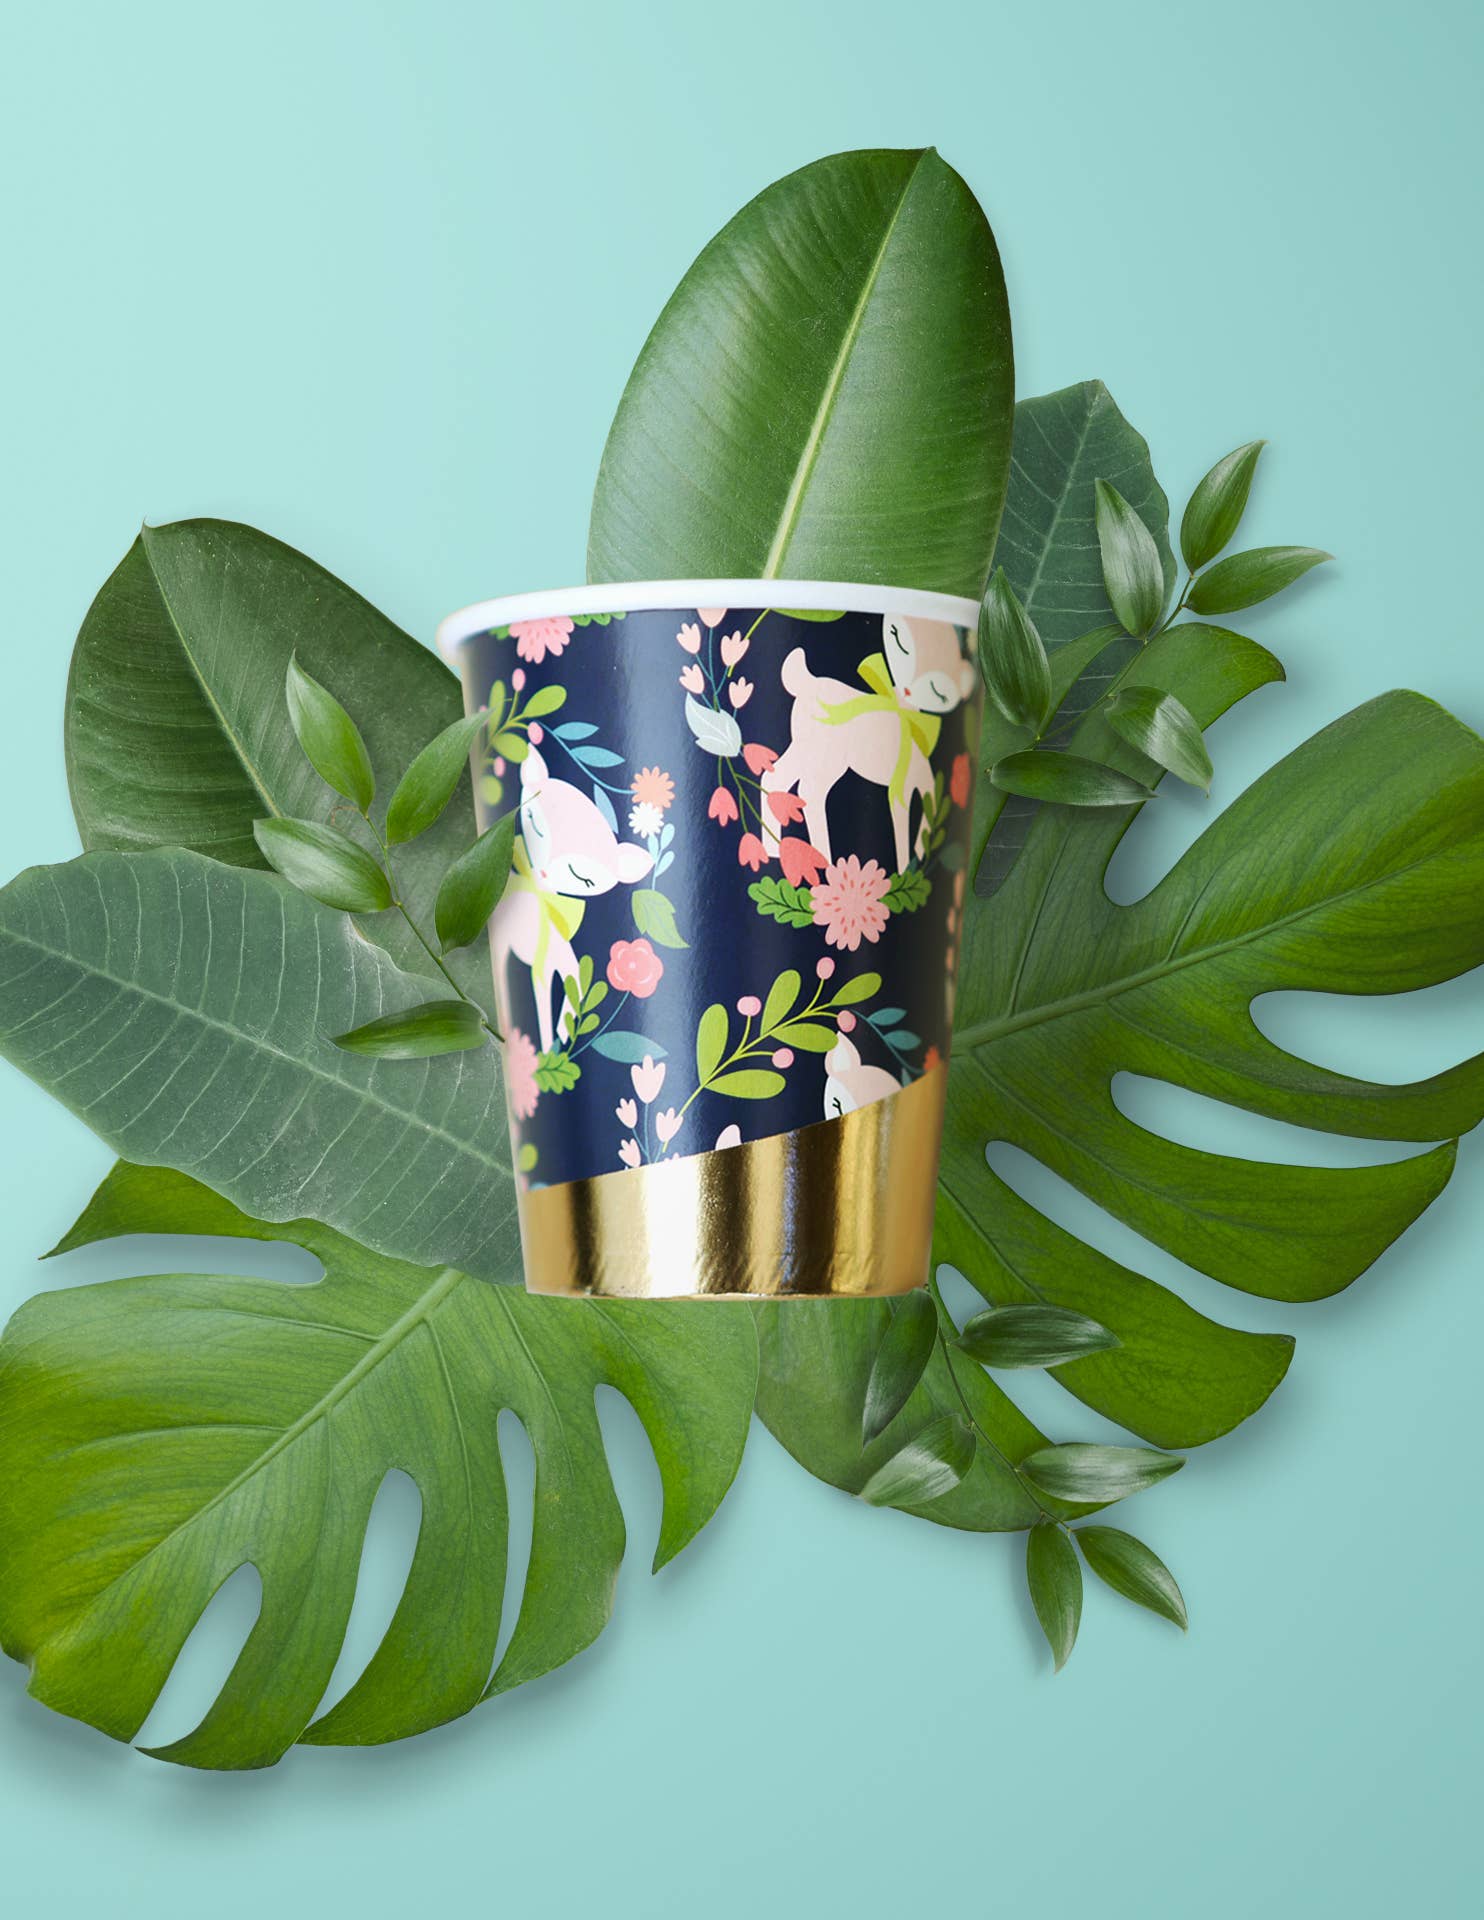 Woodland Animals Party Cups